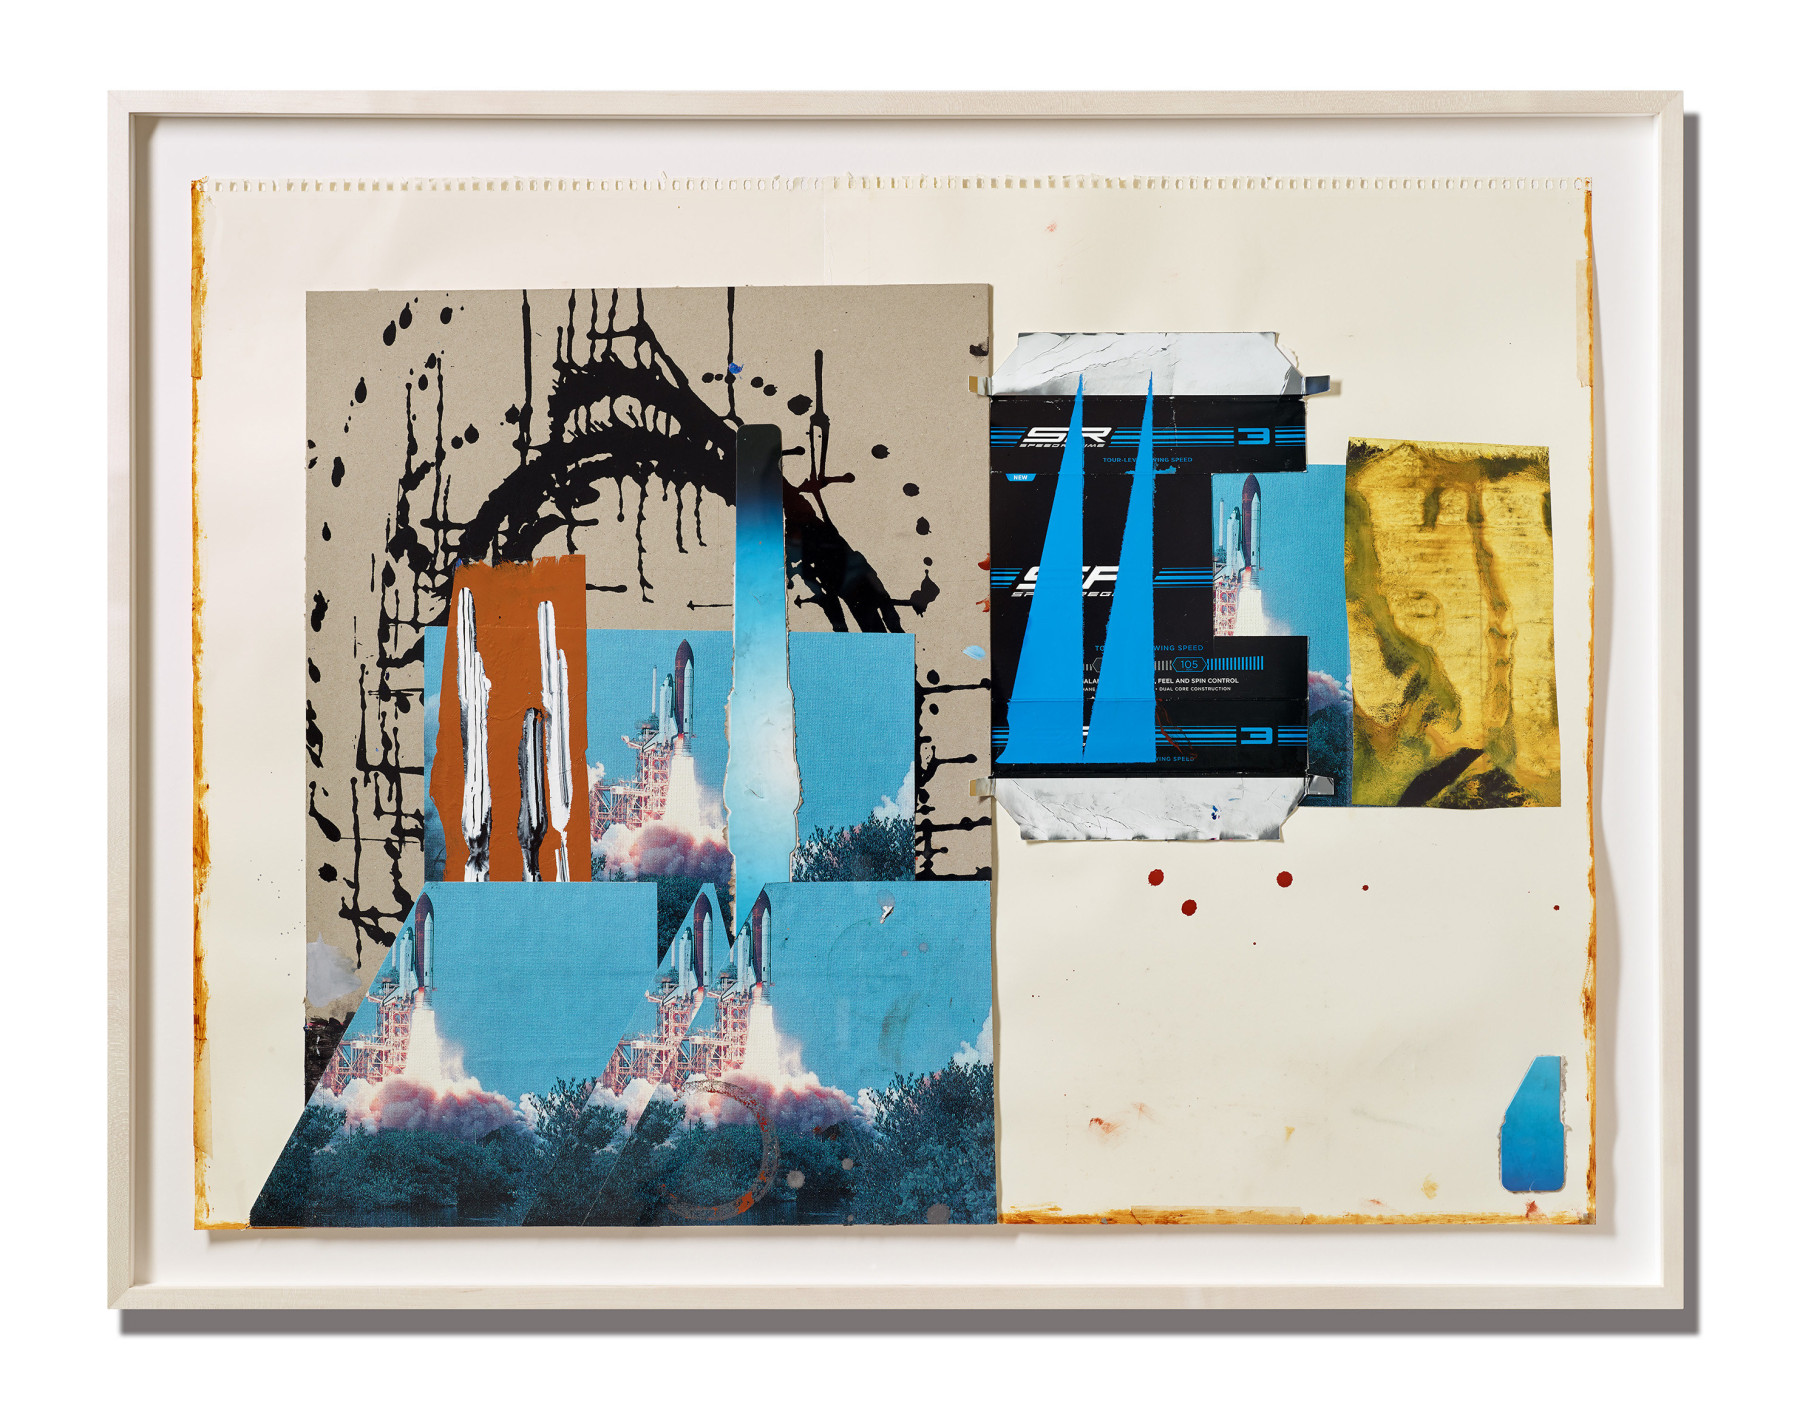 Shane Tolbert Southwest Space Race, 2021 acrylic, ink, oil, inkjet print, found material on Strathmore acid free 80lb paper paper: 24 1/2 x 32 3/4 inches